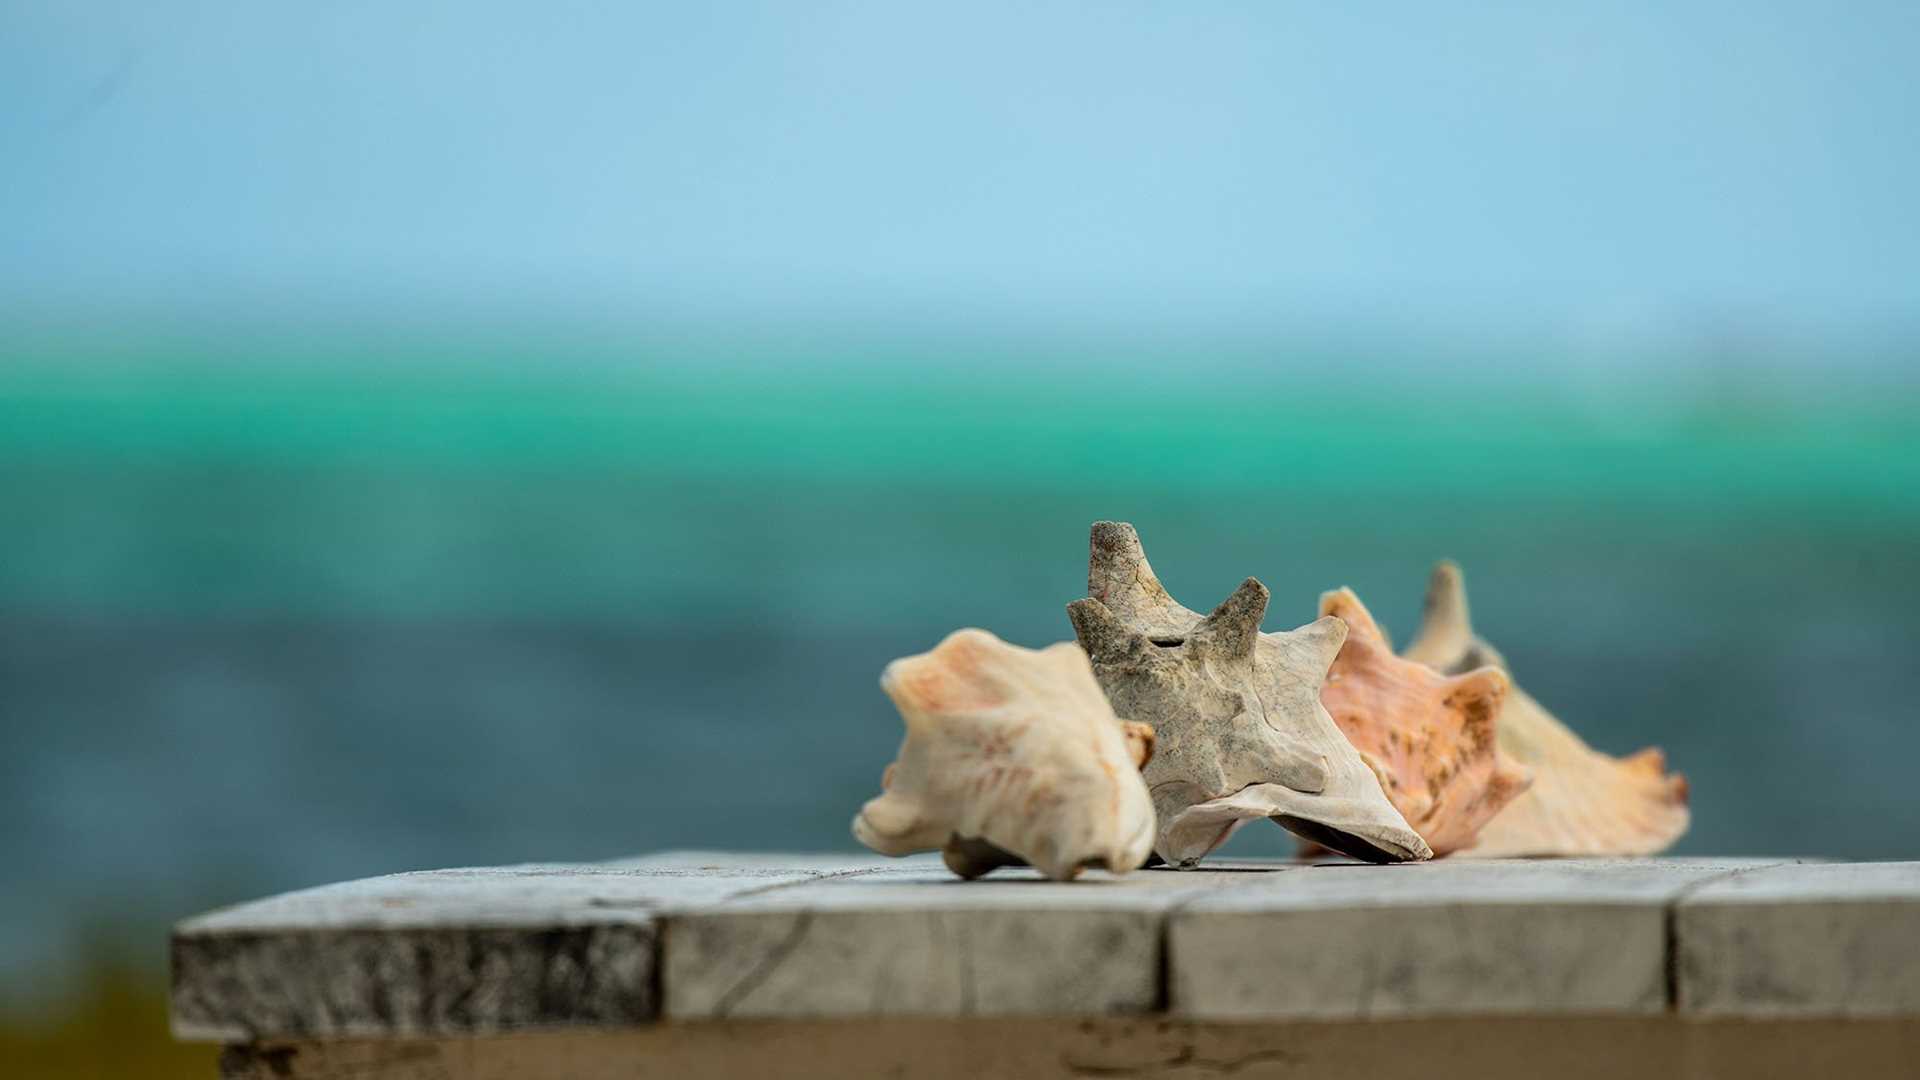 conch shell on picnic table